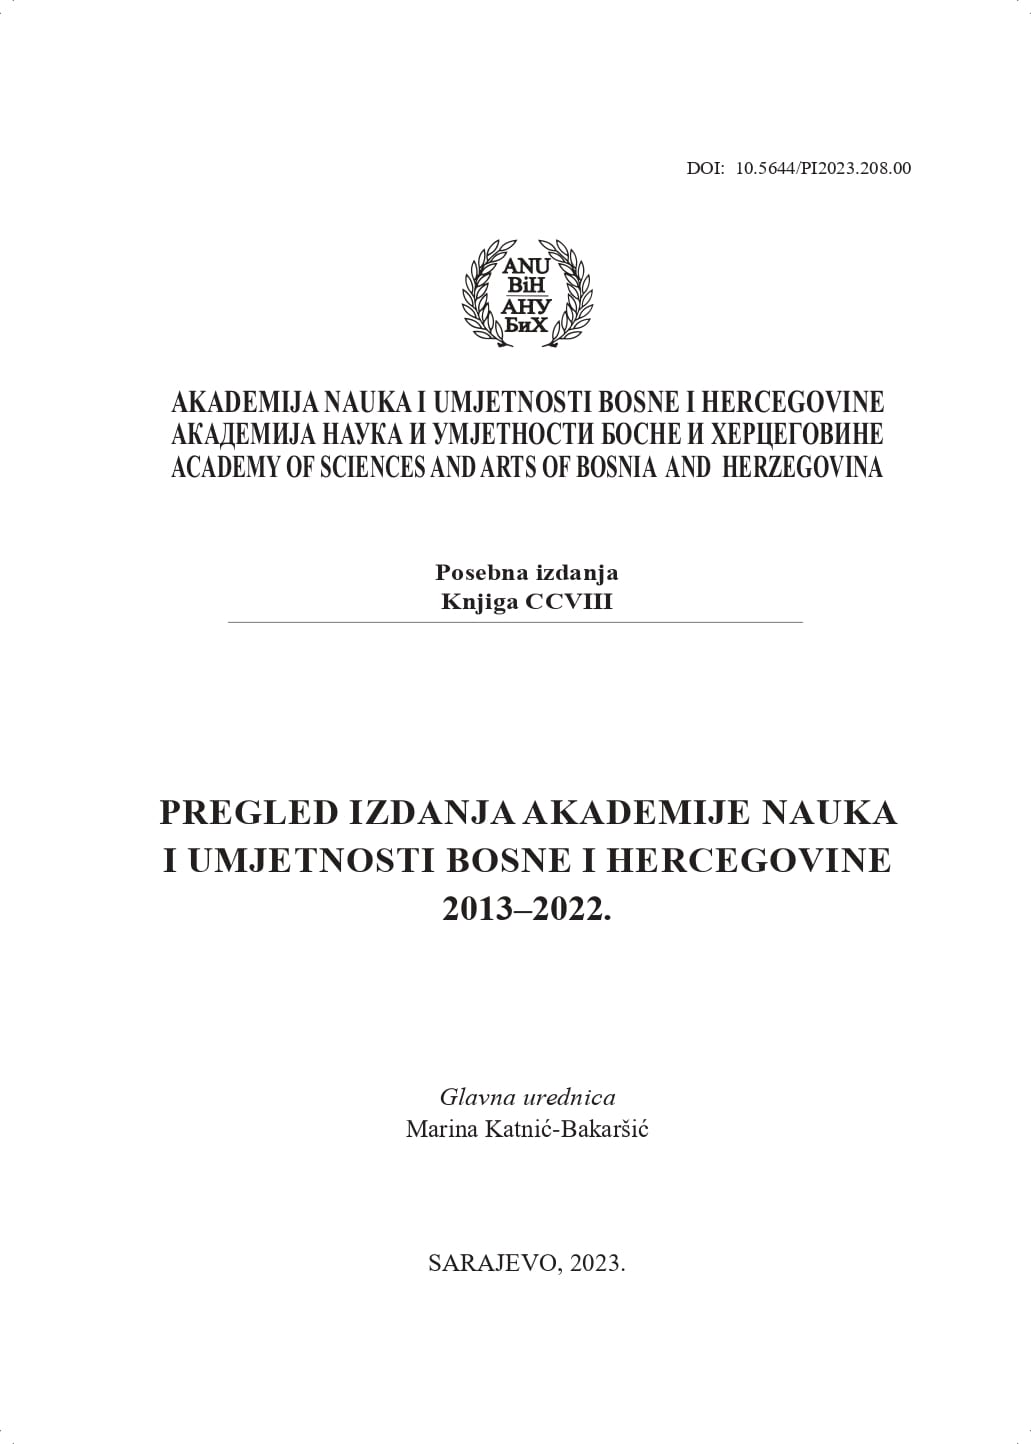 SURVEY OF PUBLICATIONS OF THE  ACADEMY OF SCIENCES AND ARTS OF  BOSNIA AND HERZEGOVINA 2013–2022